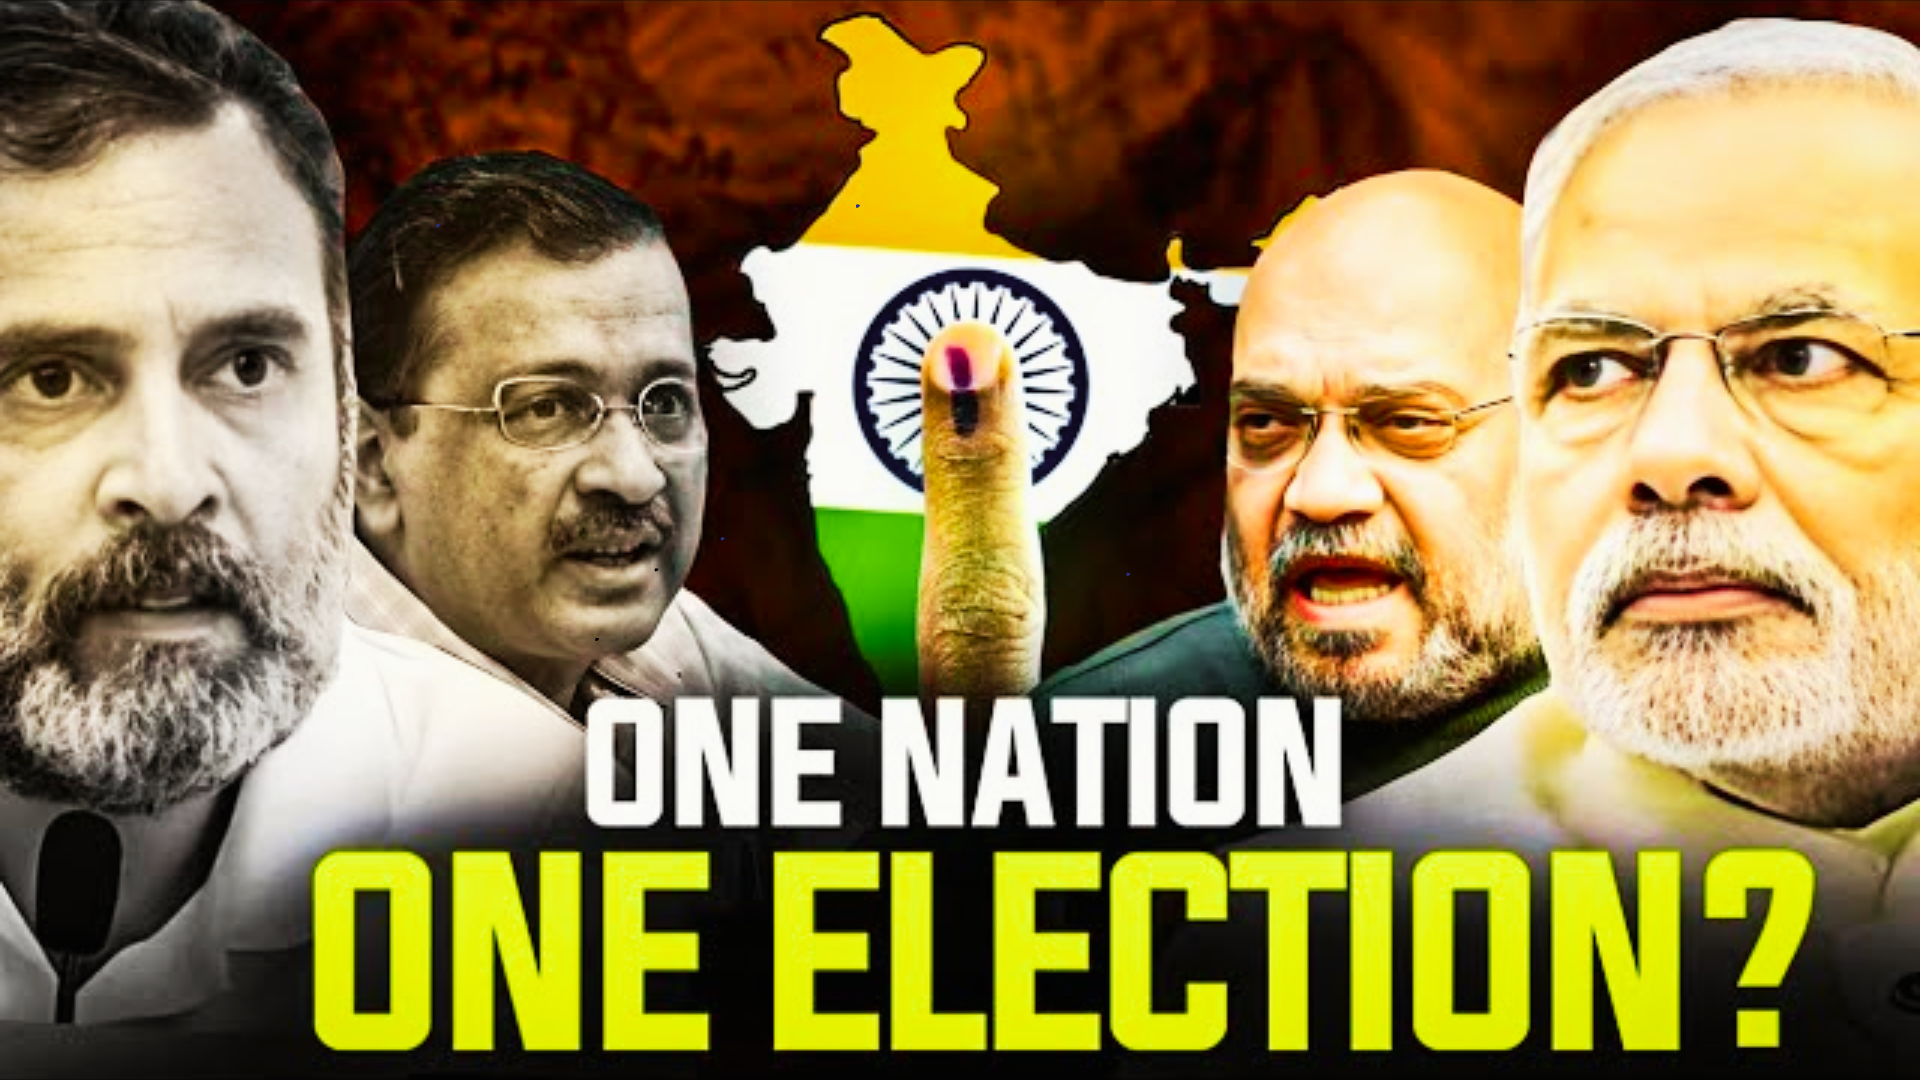 One Nation One Election: Key Recommendations Ram Nath Kovind Panel Made In Its Report